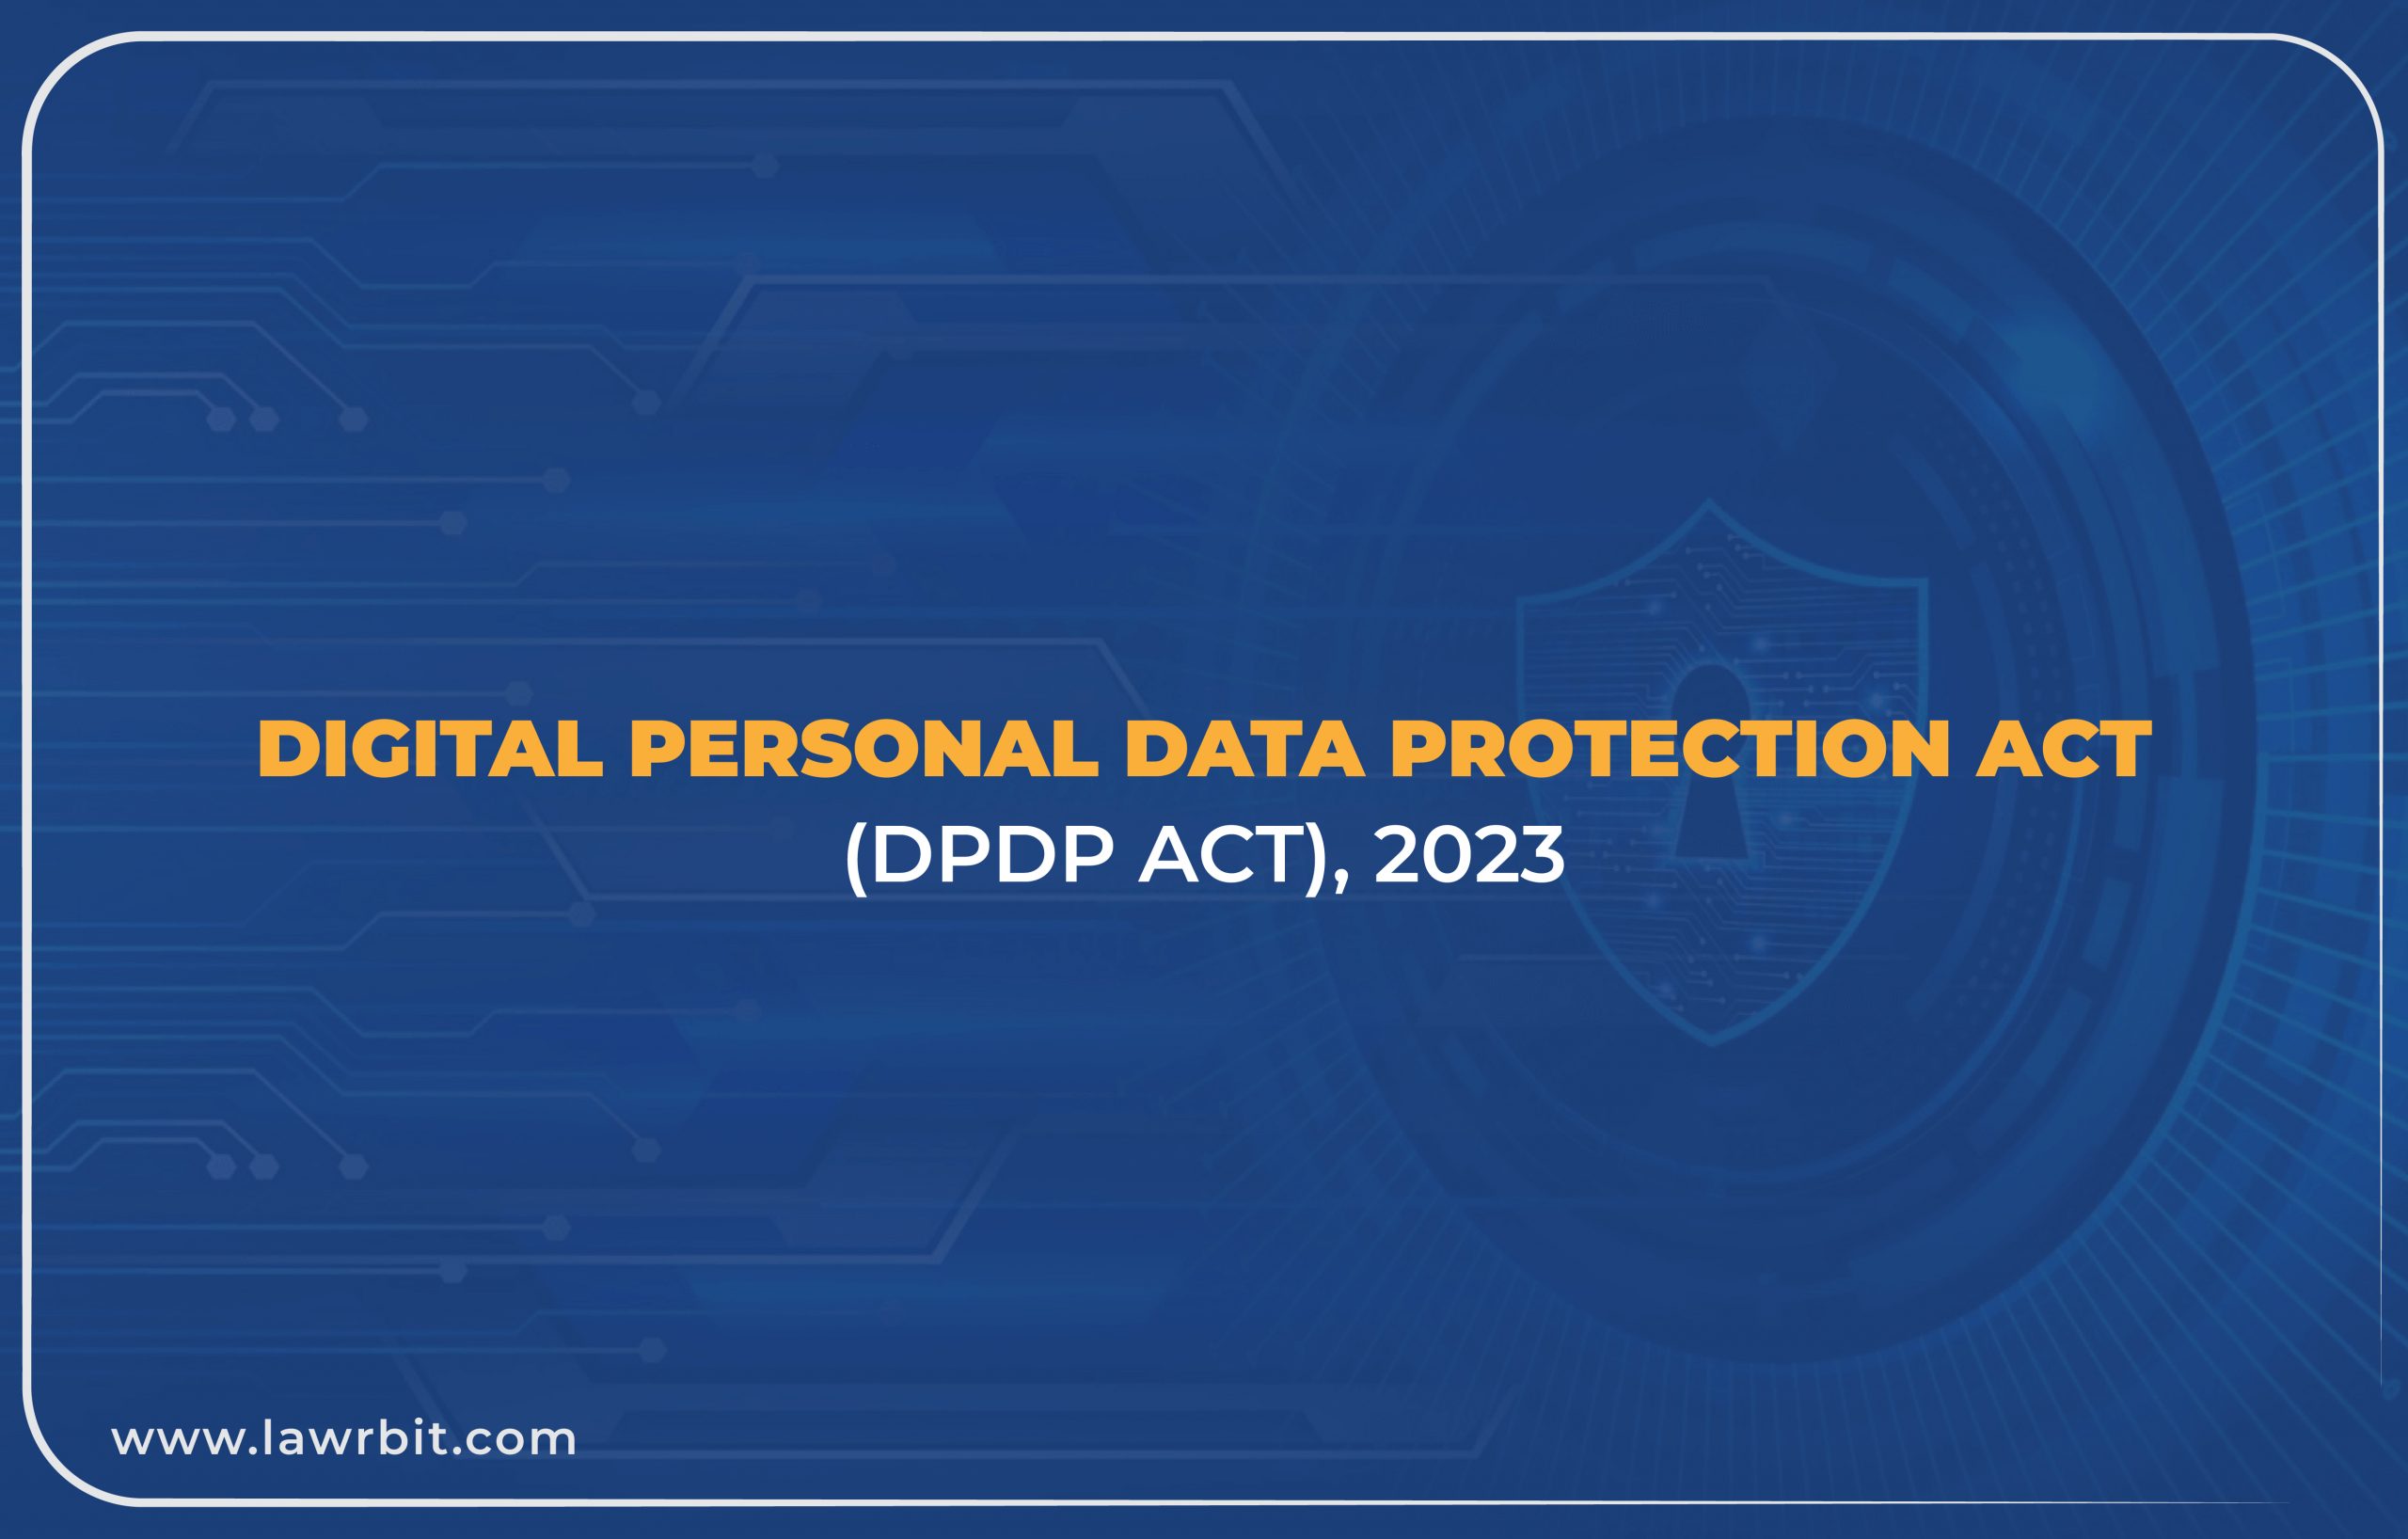 Digital Personal Data Protection Act (DPDP ACT), 2023 | Lawrbit